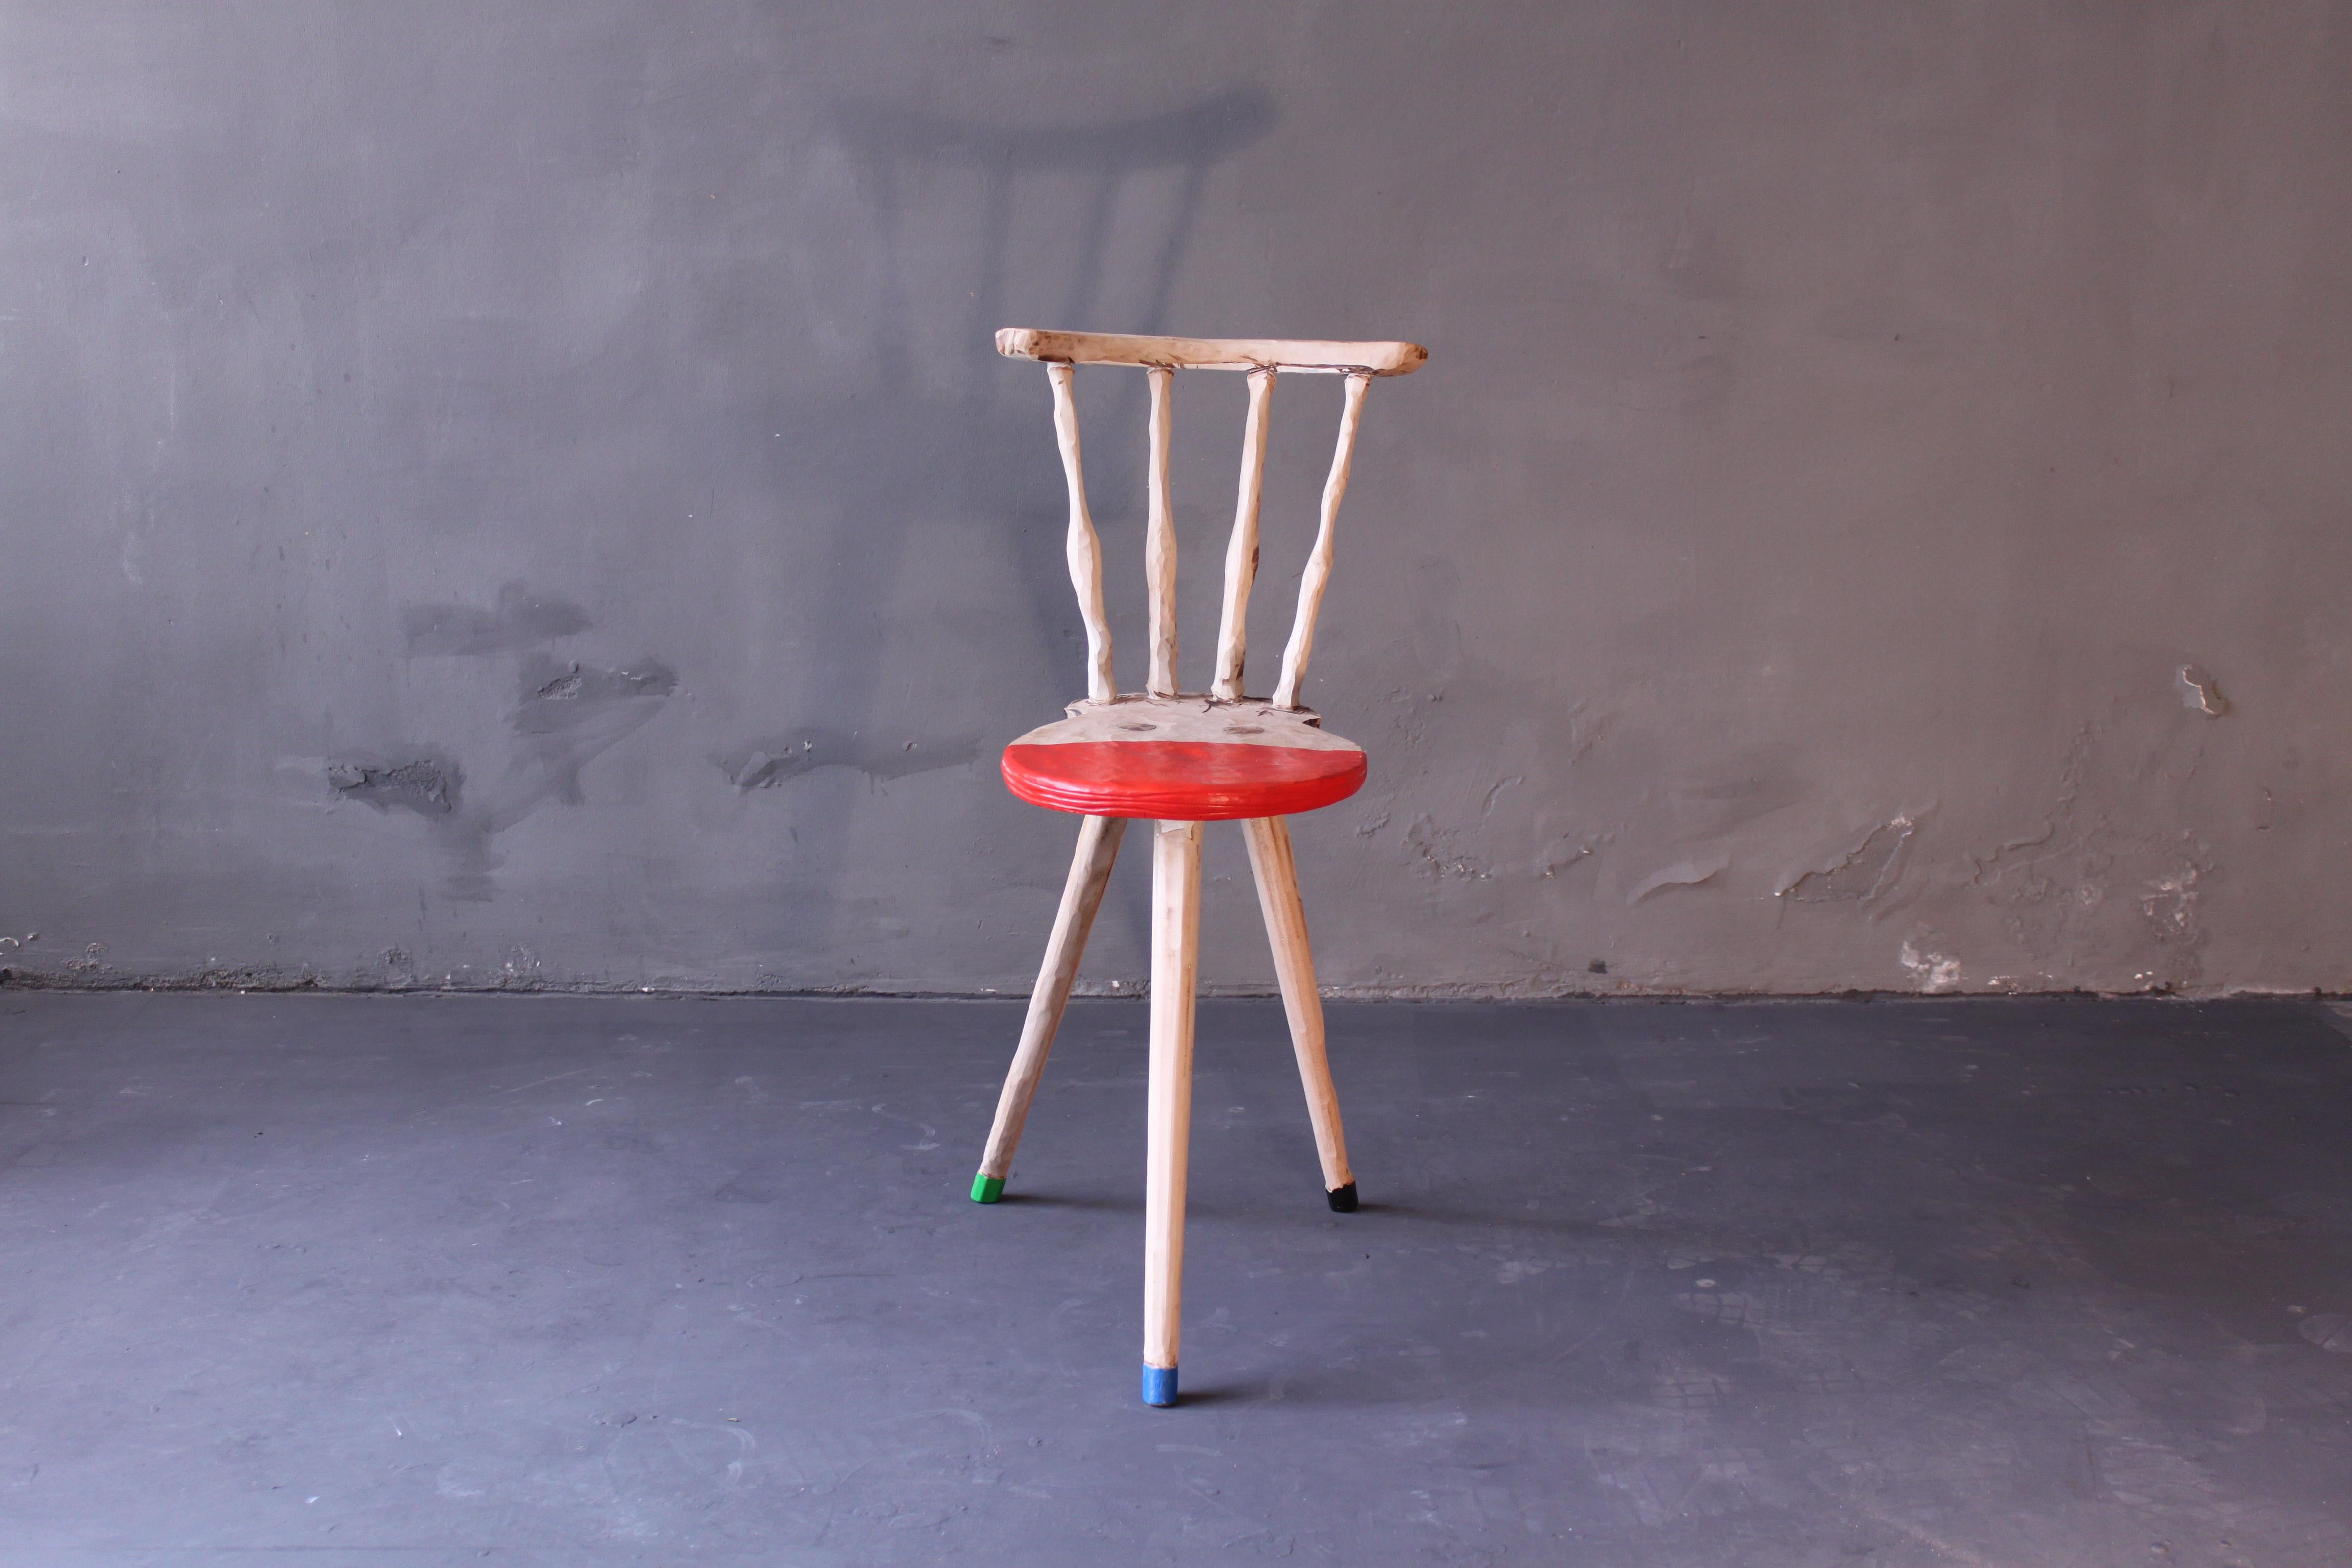 Simple farmers chair, cut, abroad, painted. A good example for Staabs work of functional art.
Through my work I transform each chair into a unique and individual object. Chairs that once were mass-produced and homogenous, become singular and